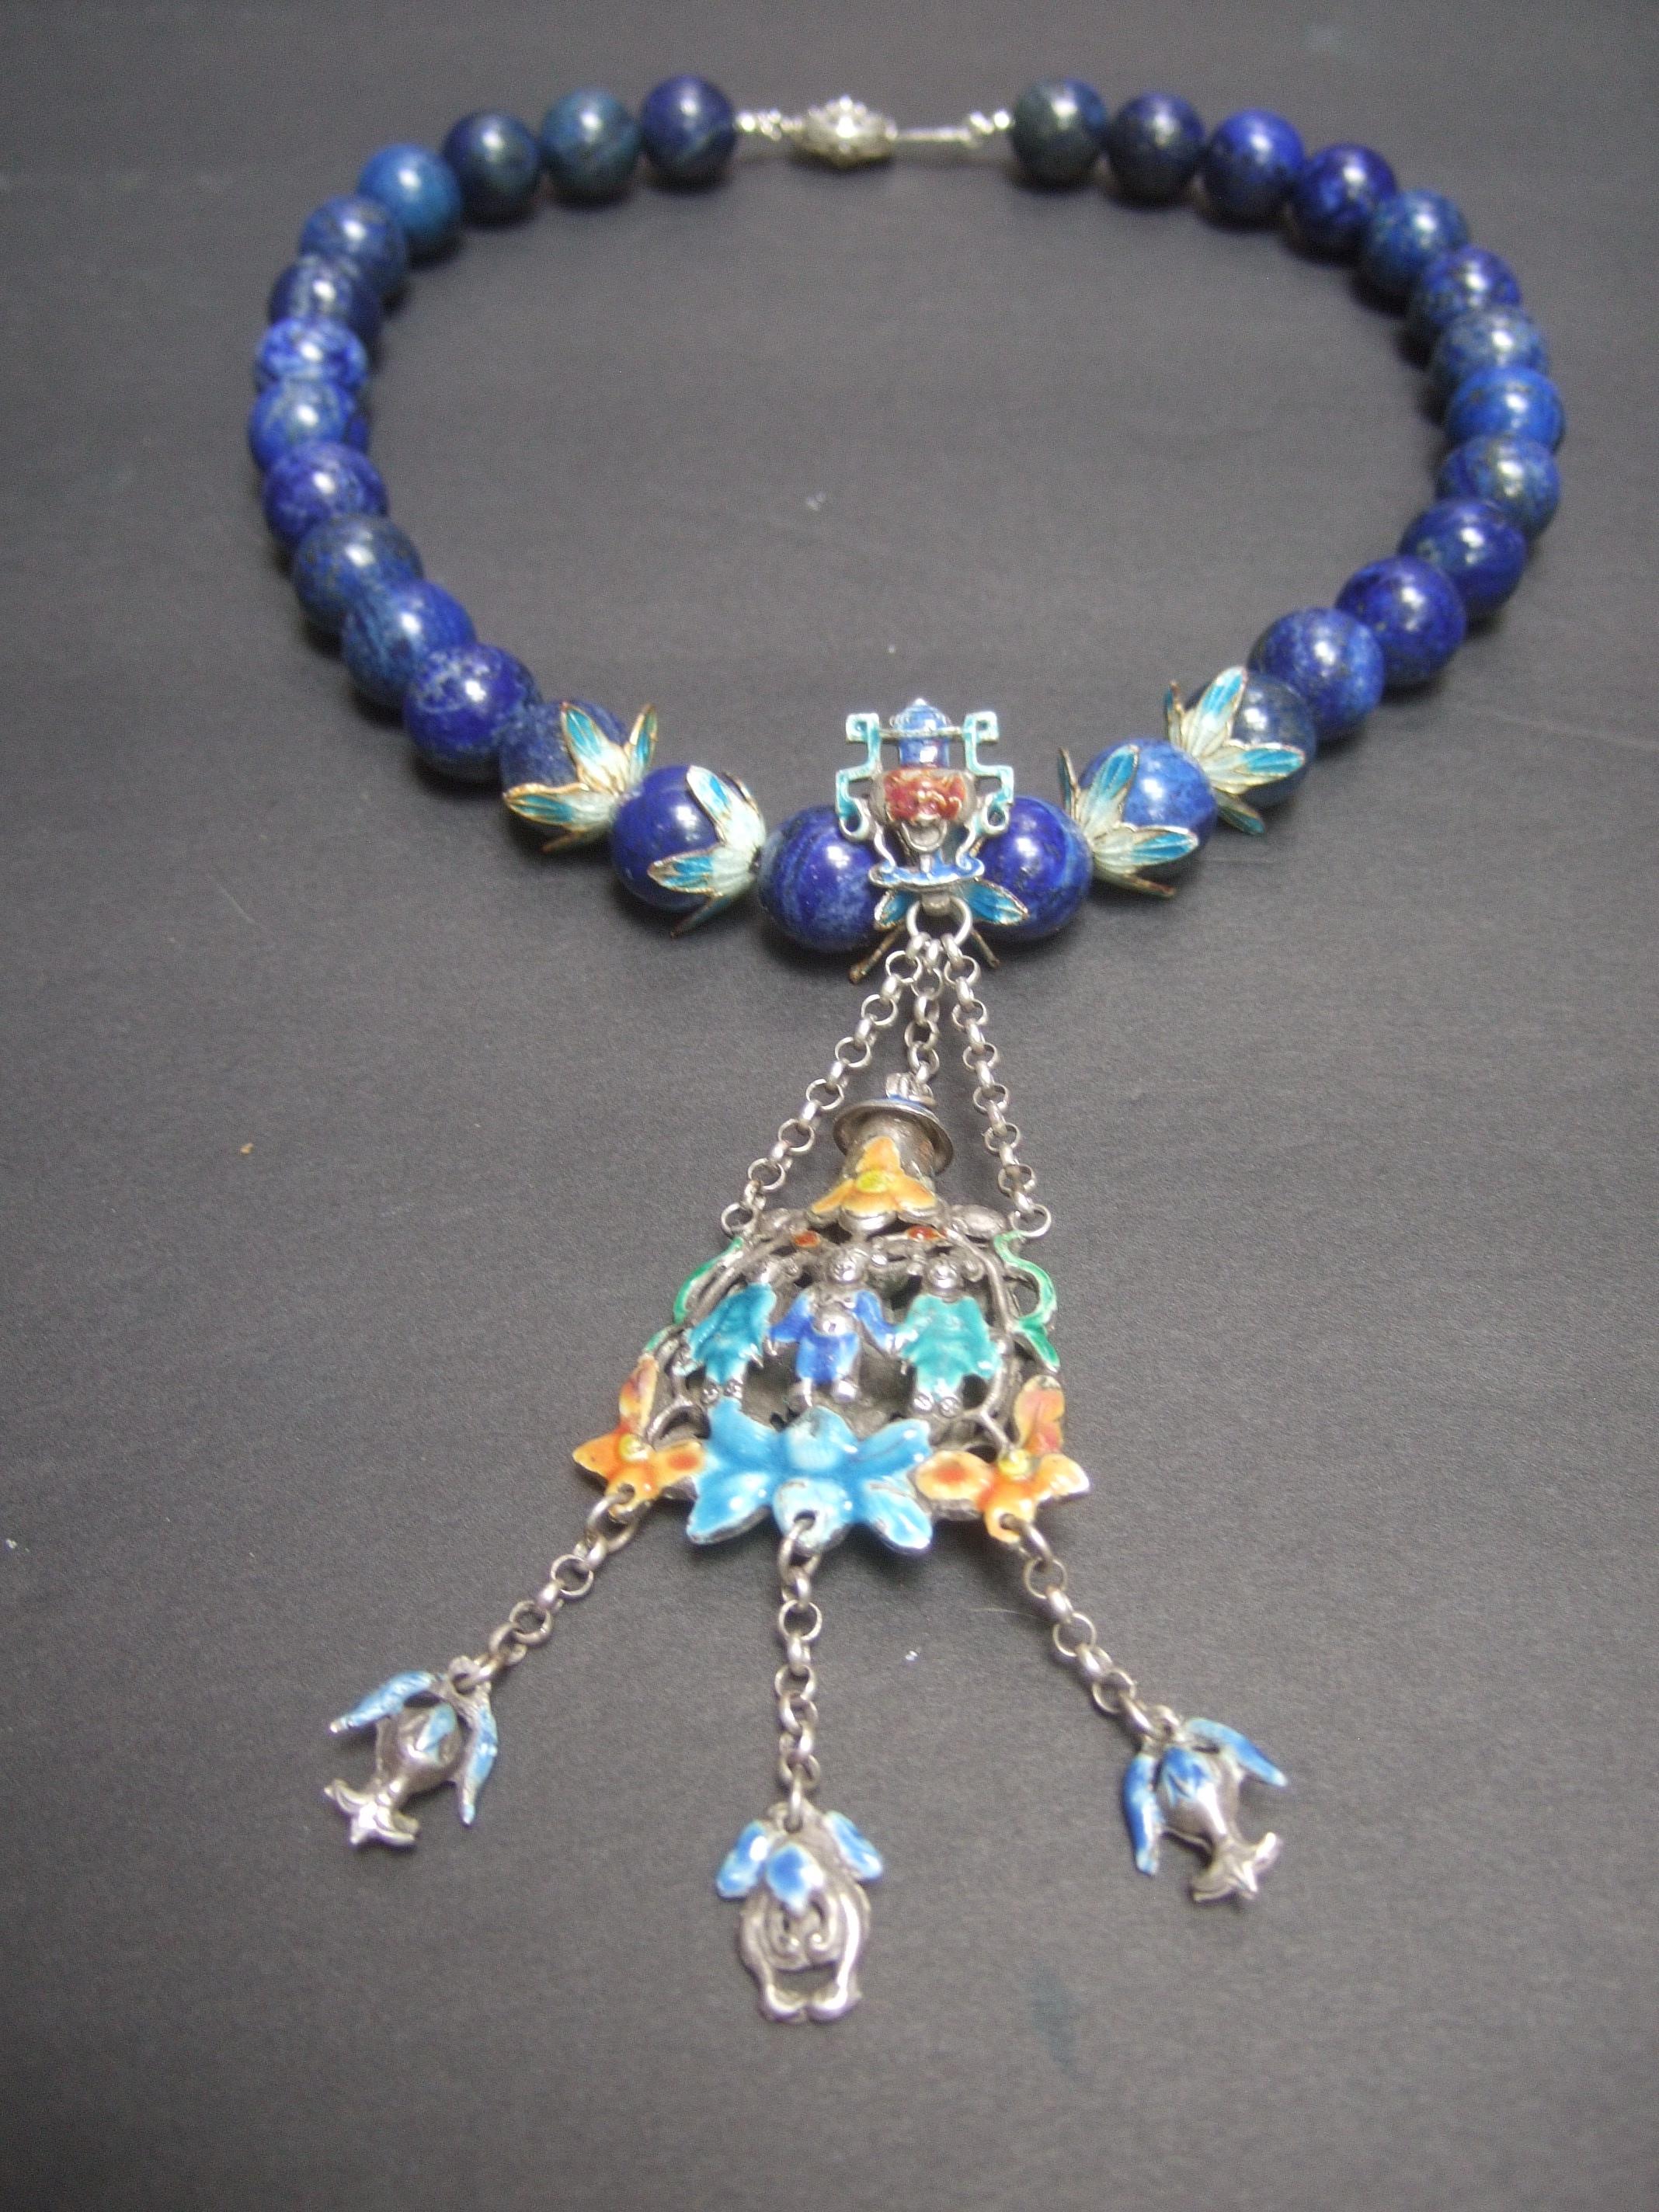 Exquisite Chinese sterling Lapis figural enamel necklace c 1930s
The fabulous Chinese sterling necklace merges two
extraordinary designs into one incredible artisan creation 

The beautiful carved enamel Lapis beaded necklace  
is adorned with a